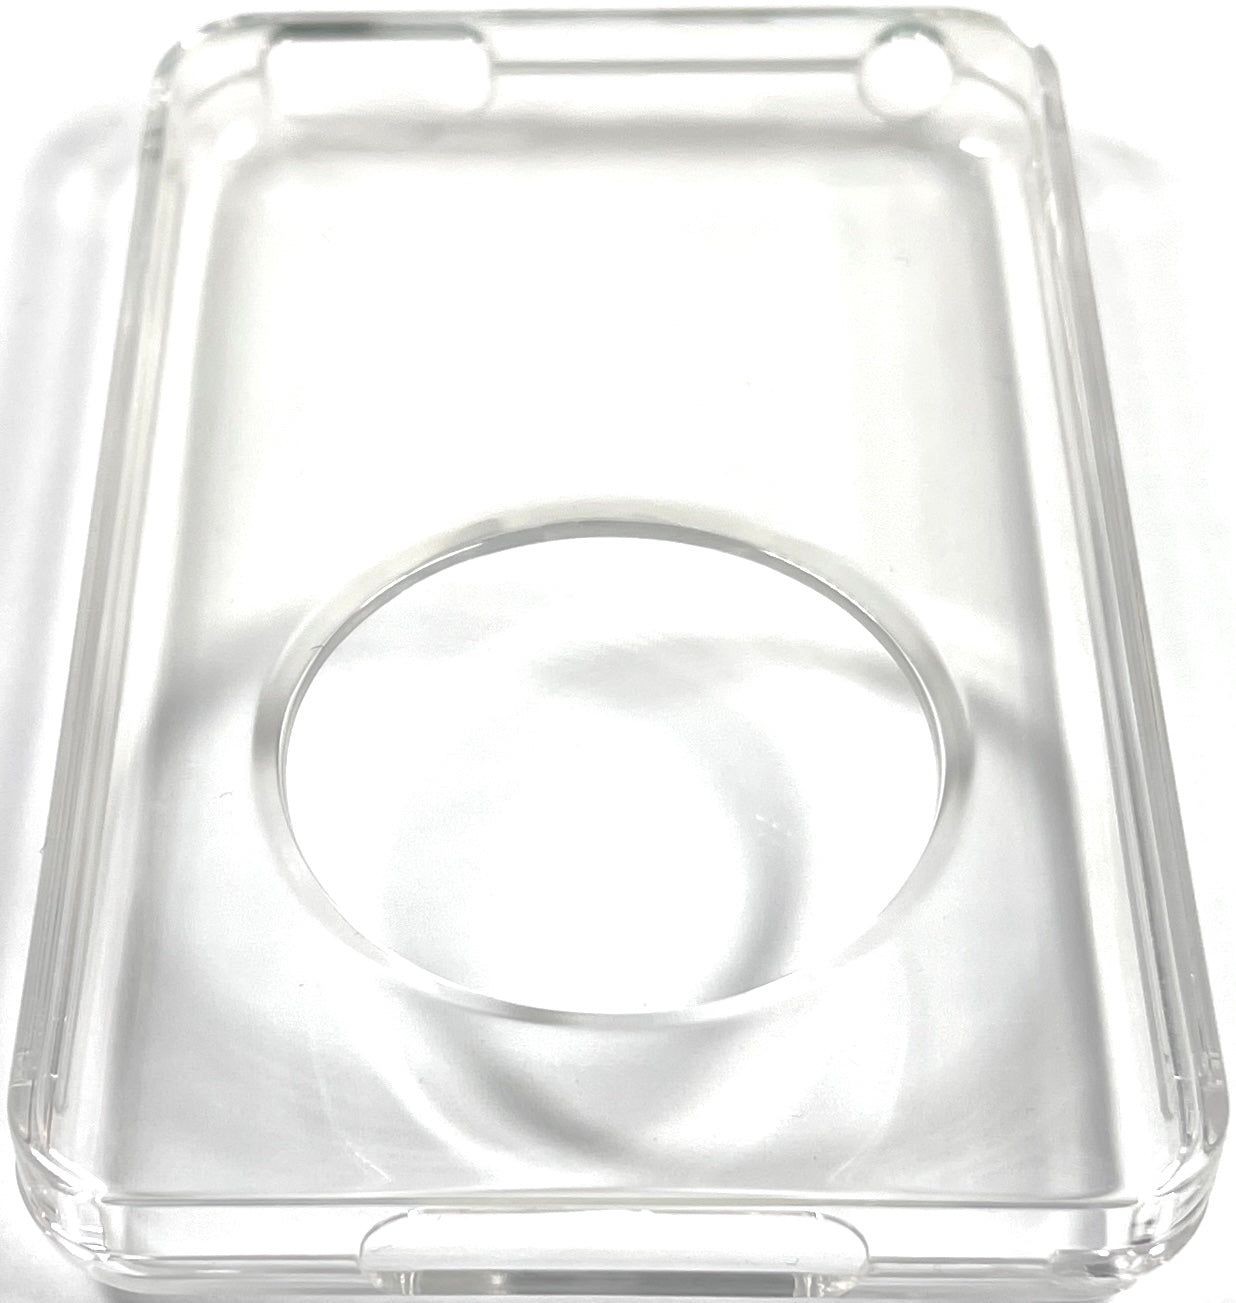 Transparent Crystal Clear Hard Protective Case Shell for Thin Apple iPod Classic & iPod Video 10.5mm